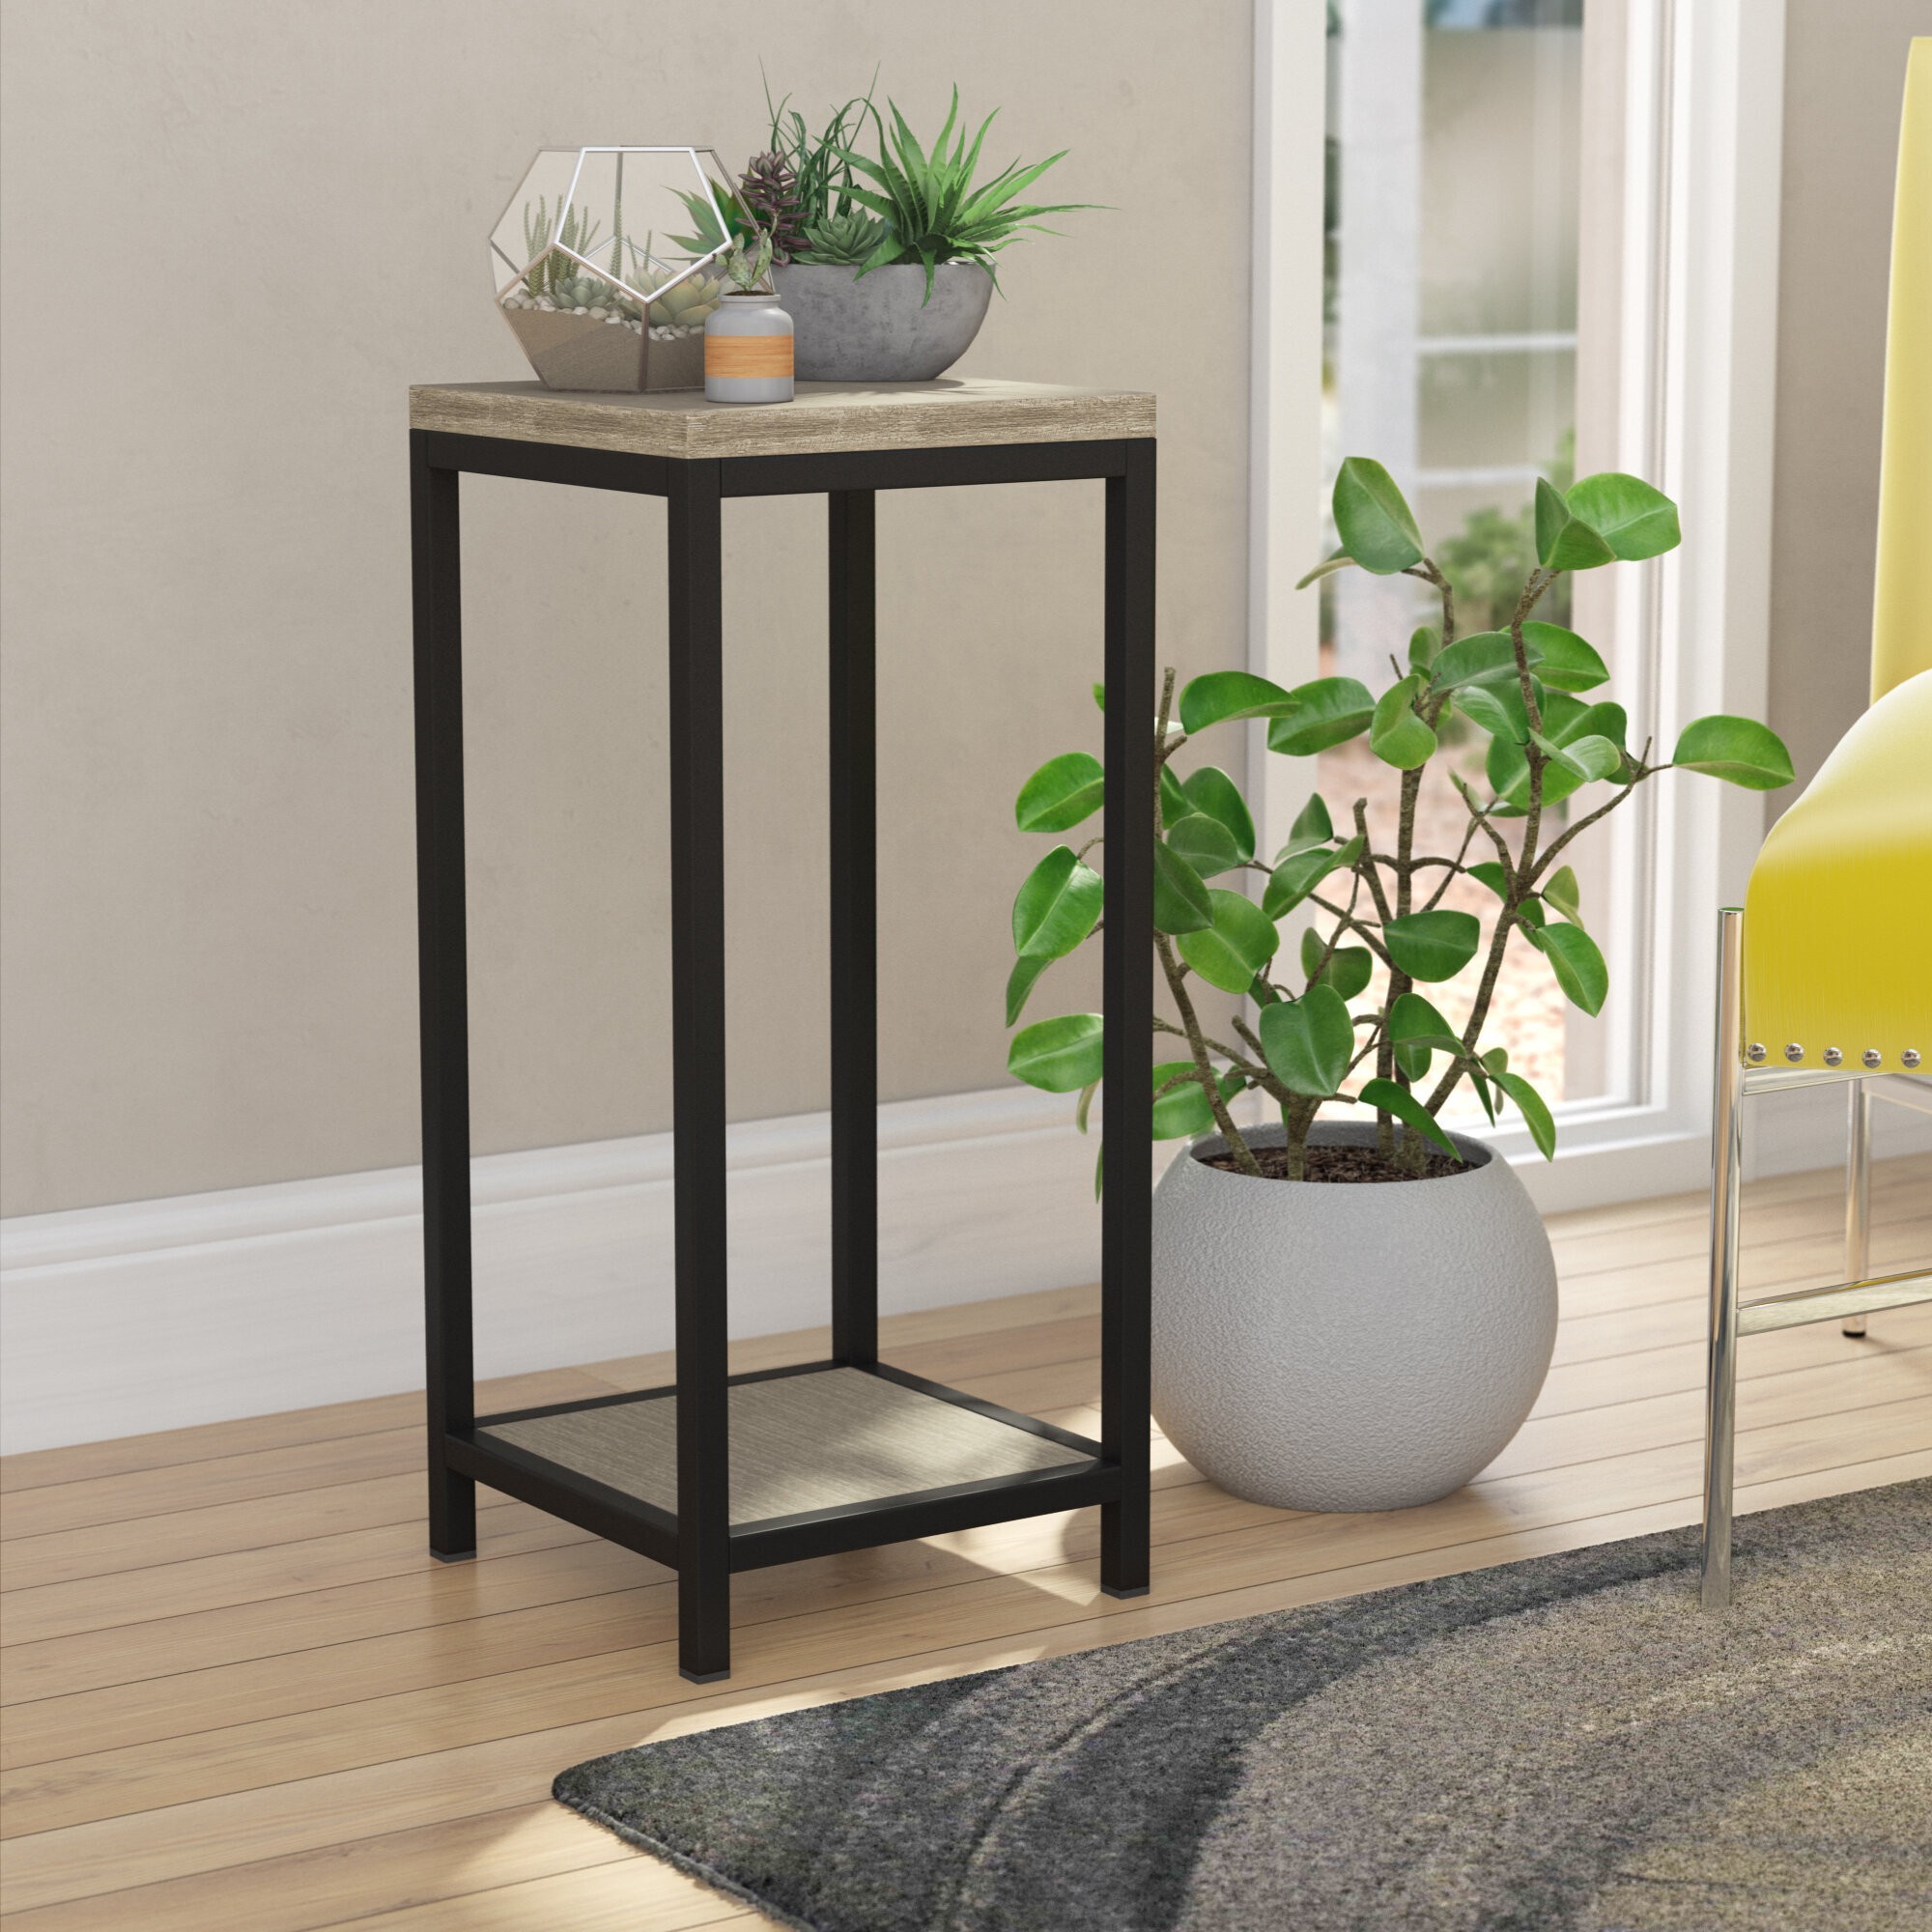 How To Choose Plant Stands & Tables - Foter